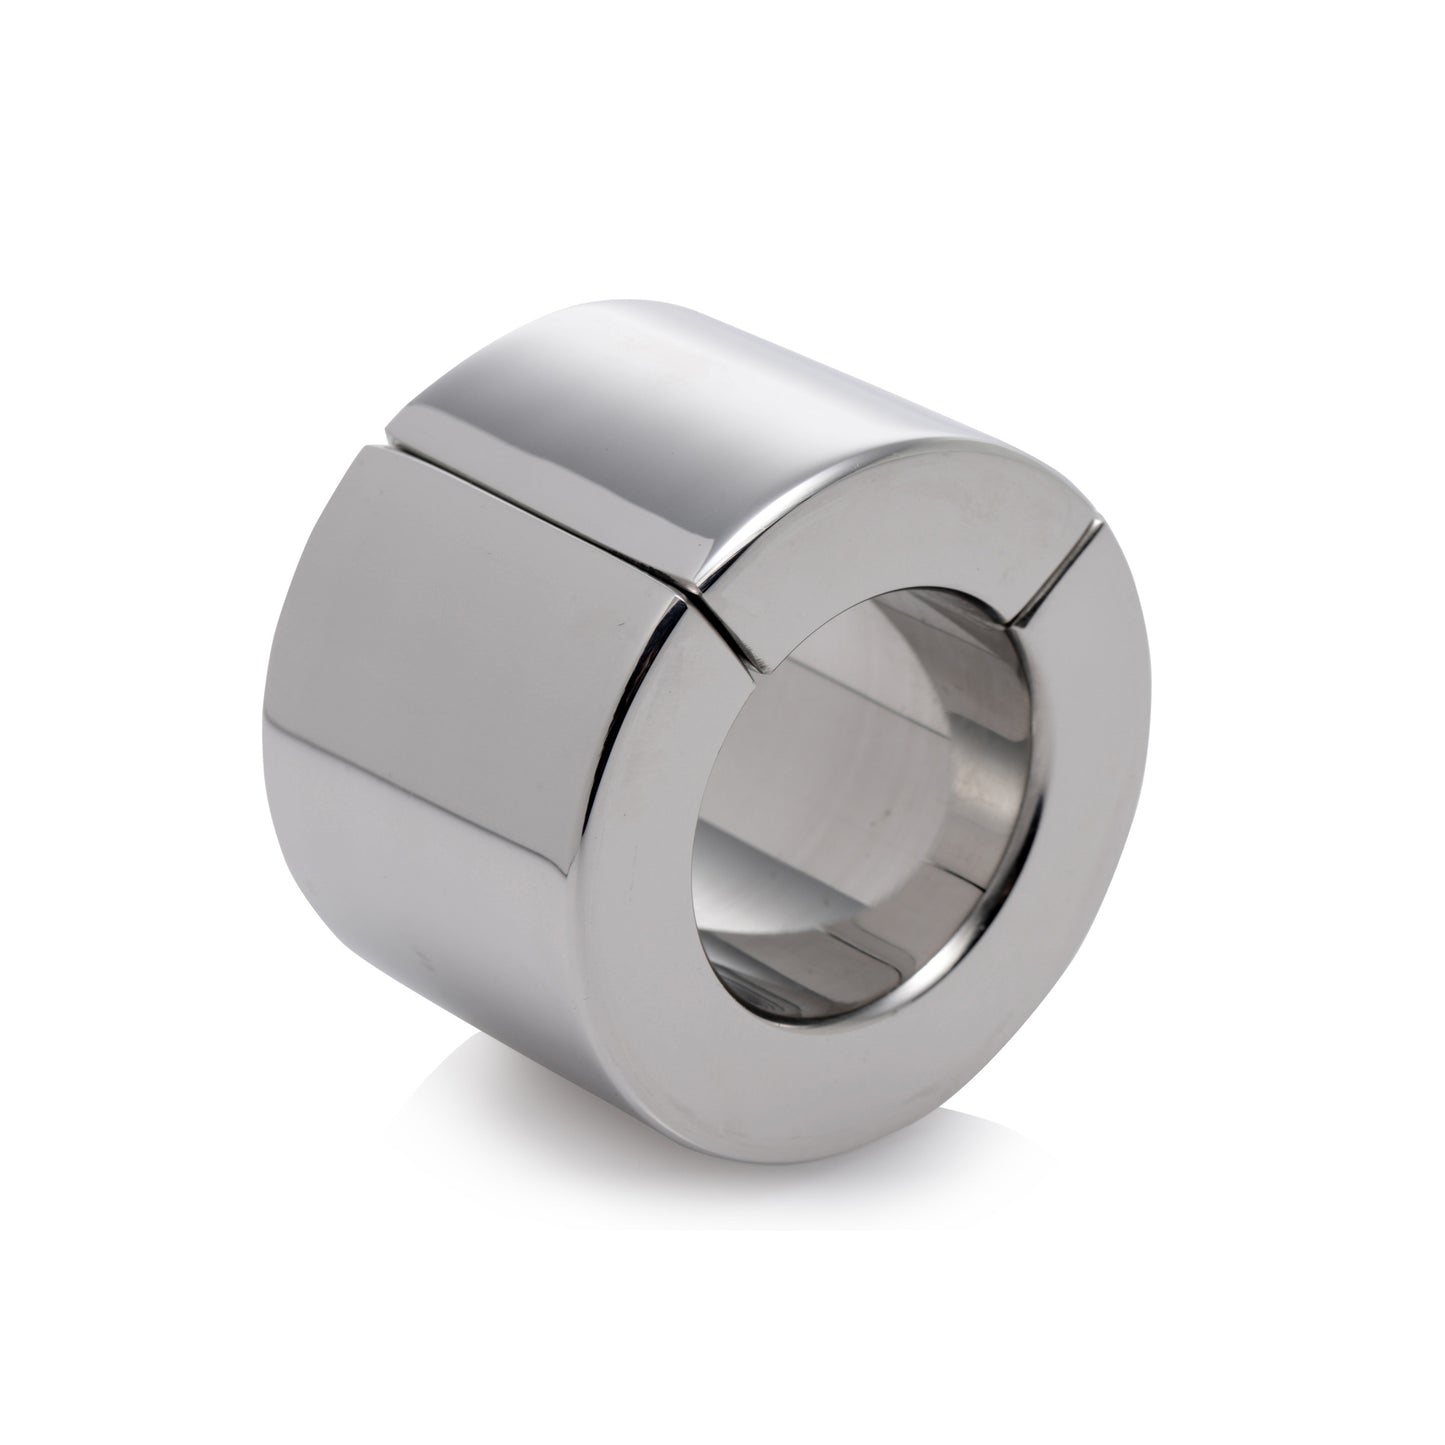 Magnetic Stainless Steel Ball Stretcher- 40mm - UABDSM